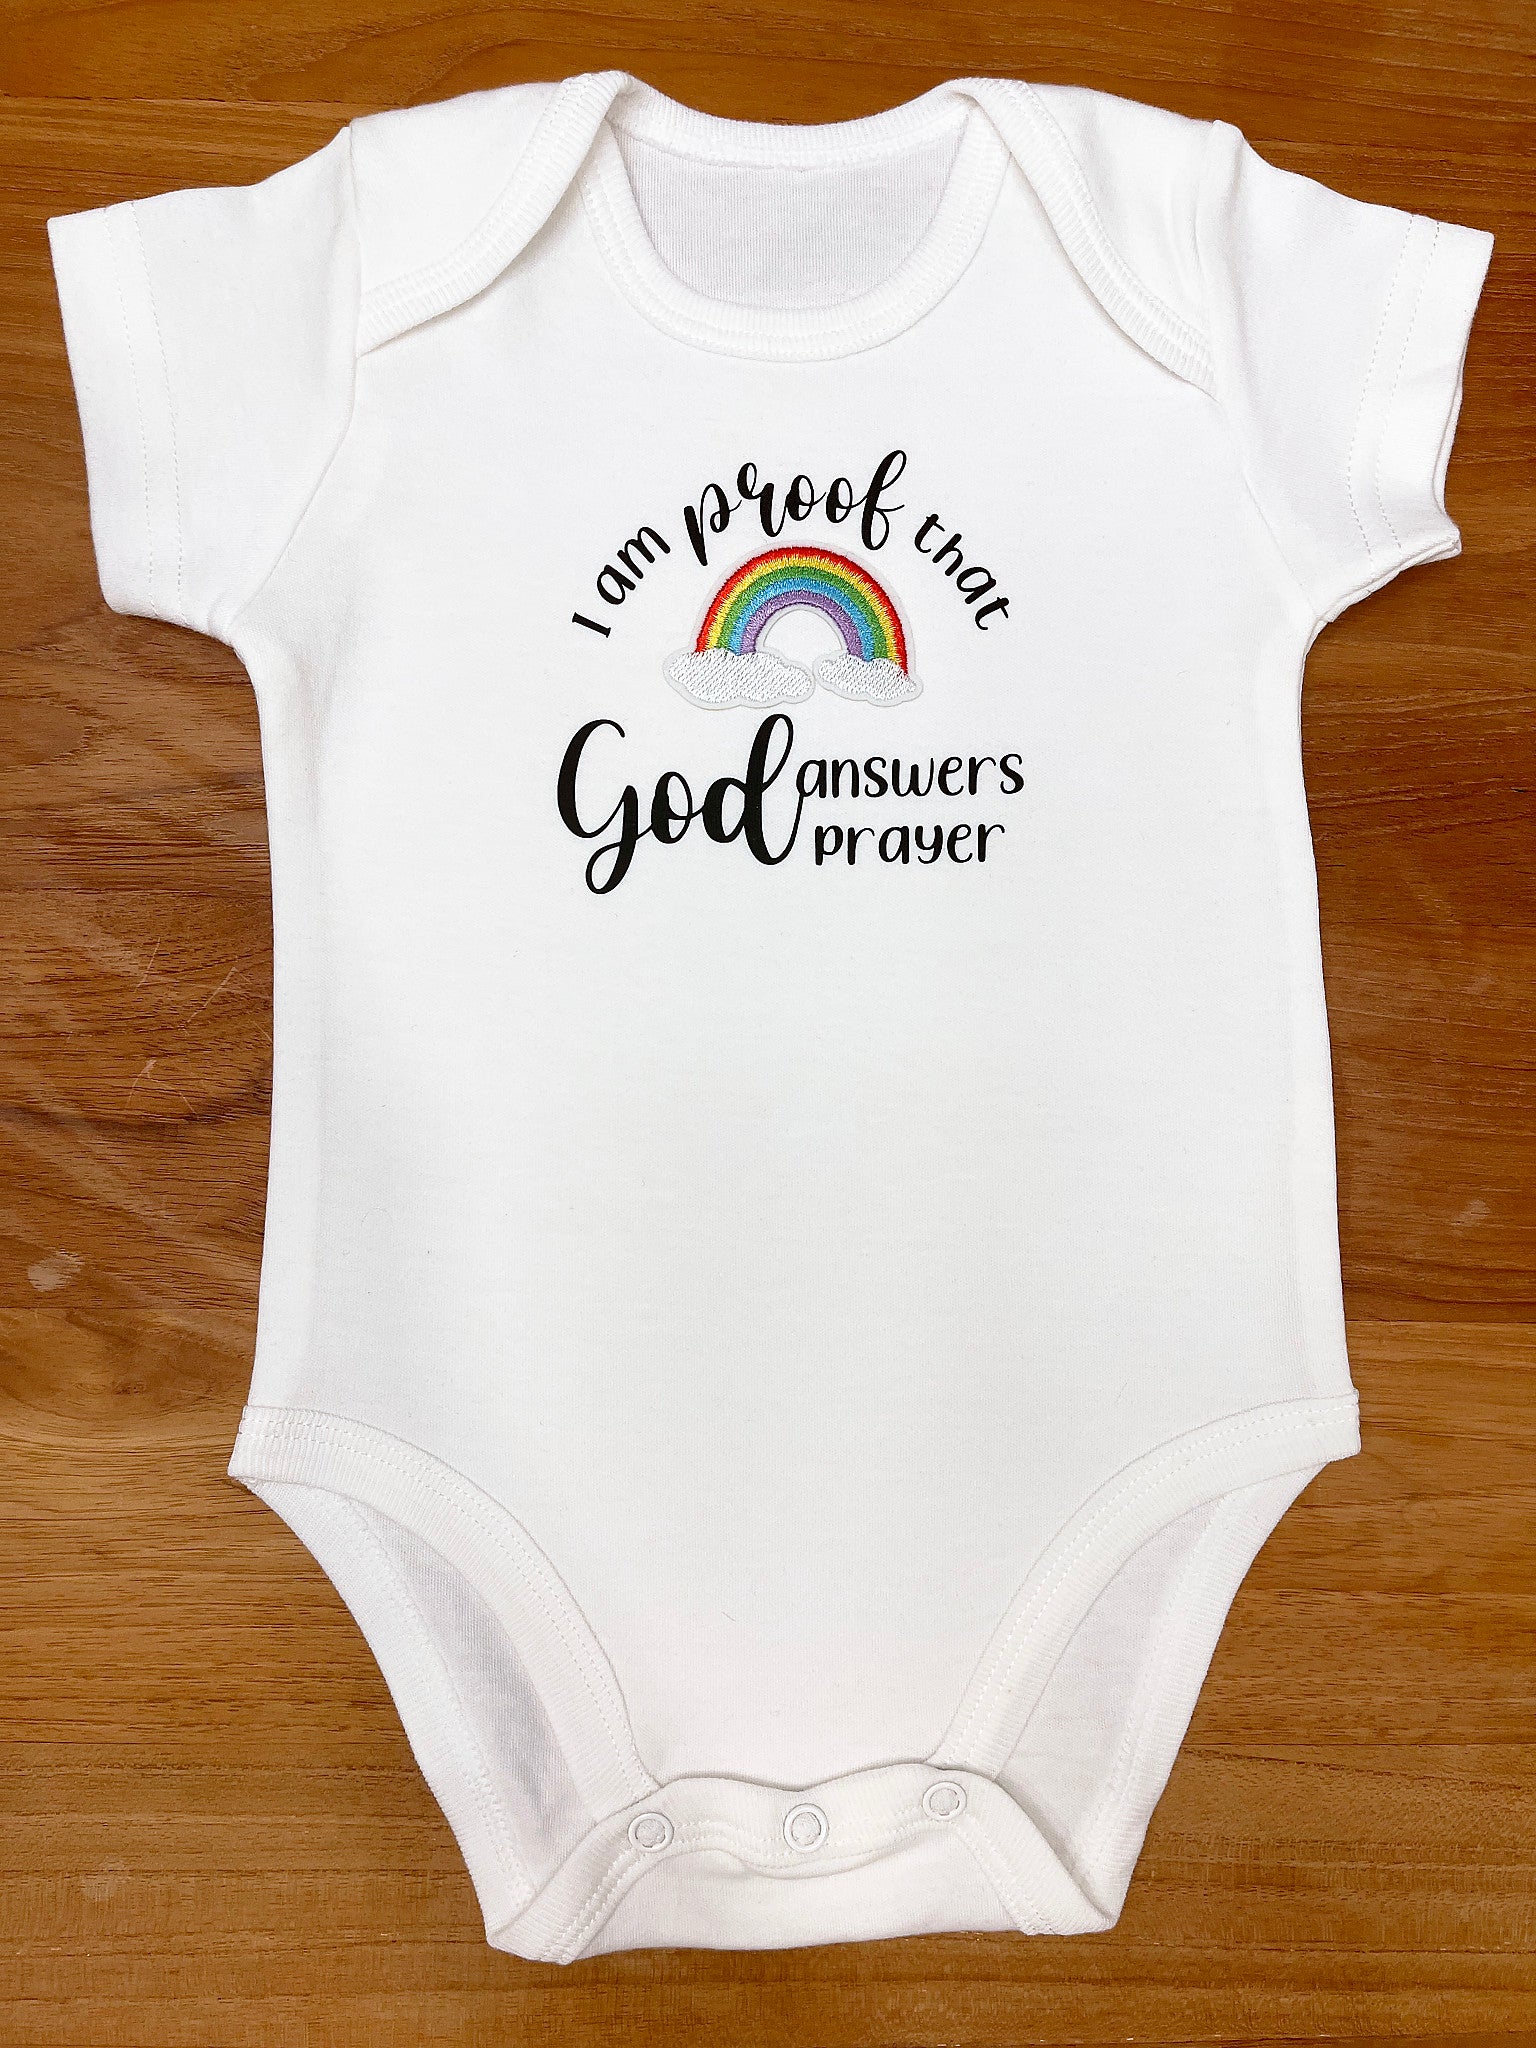  God answers prayers Miracle baby Announcement, Rainbow